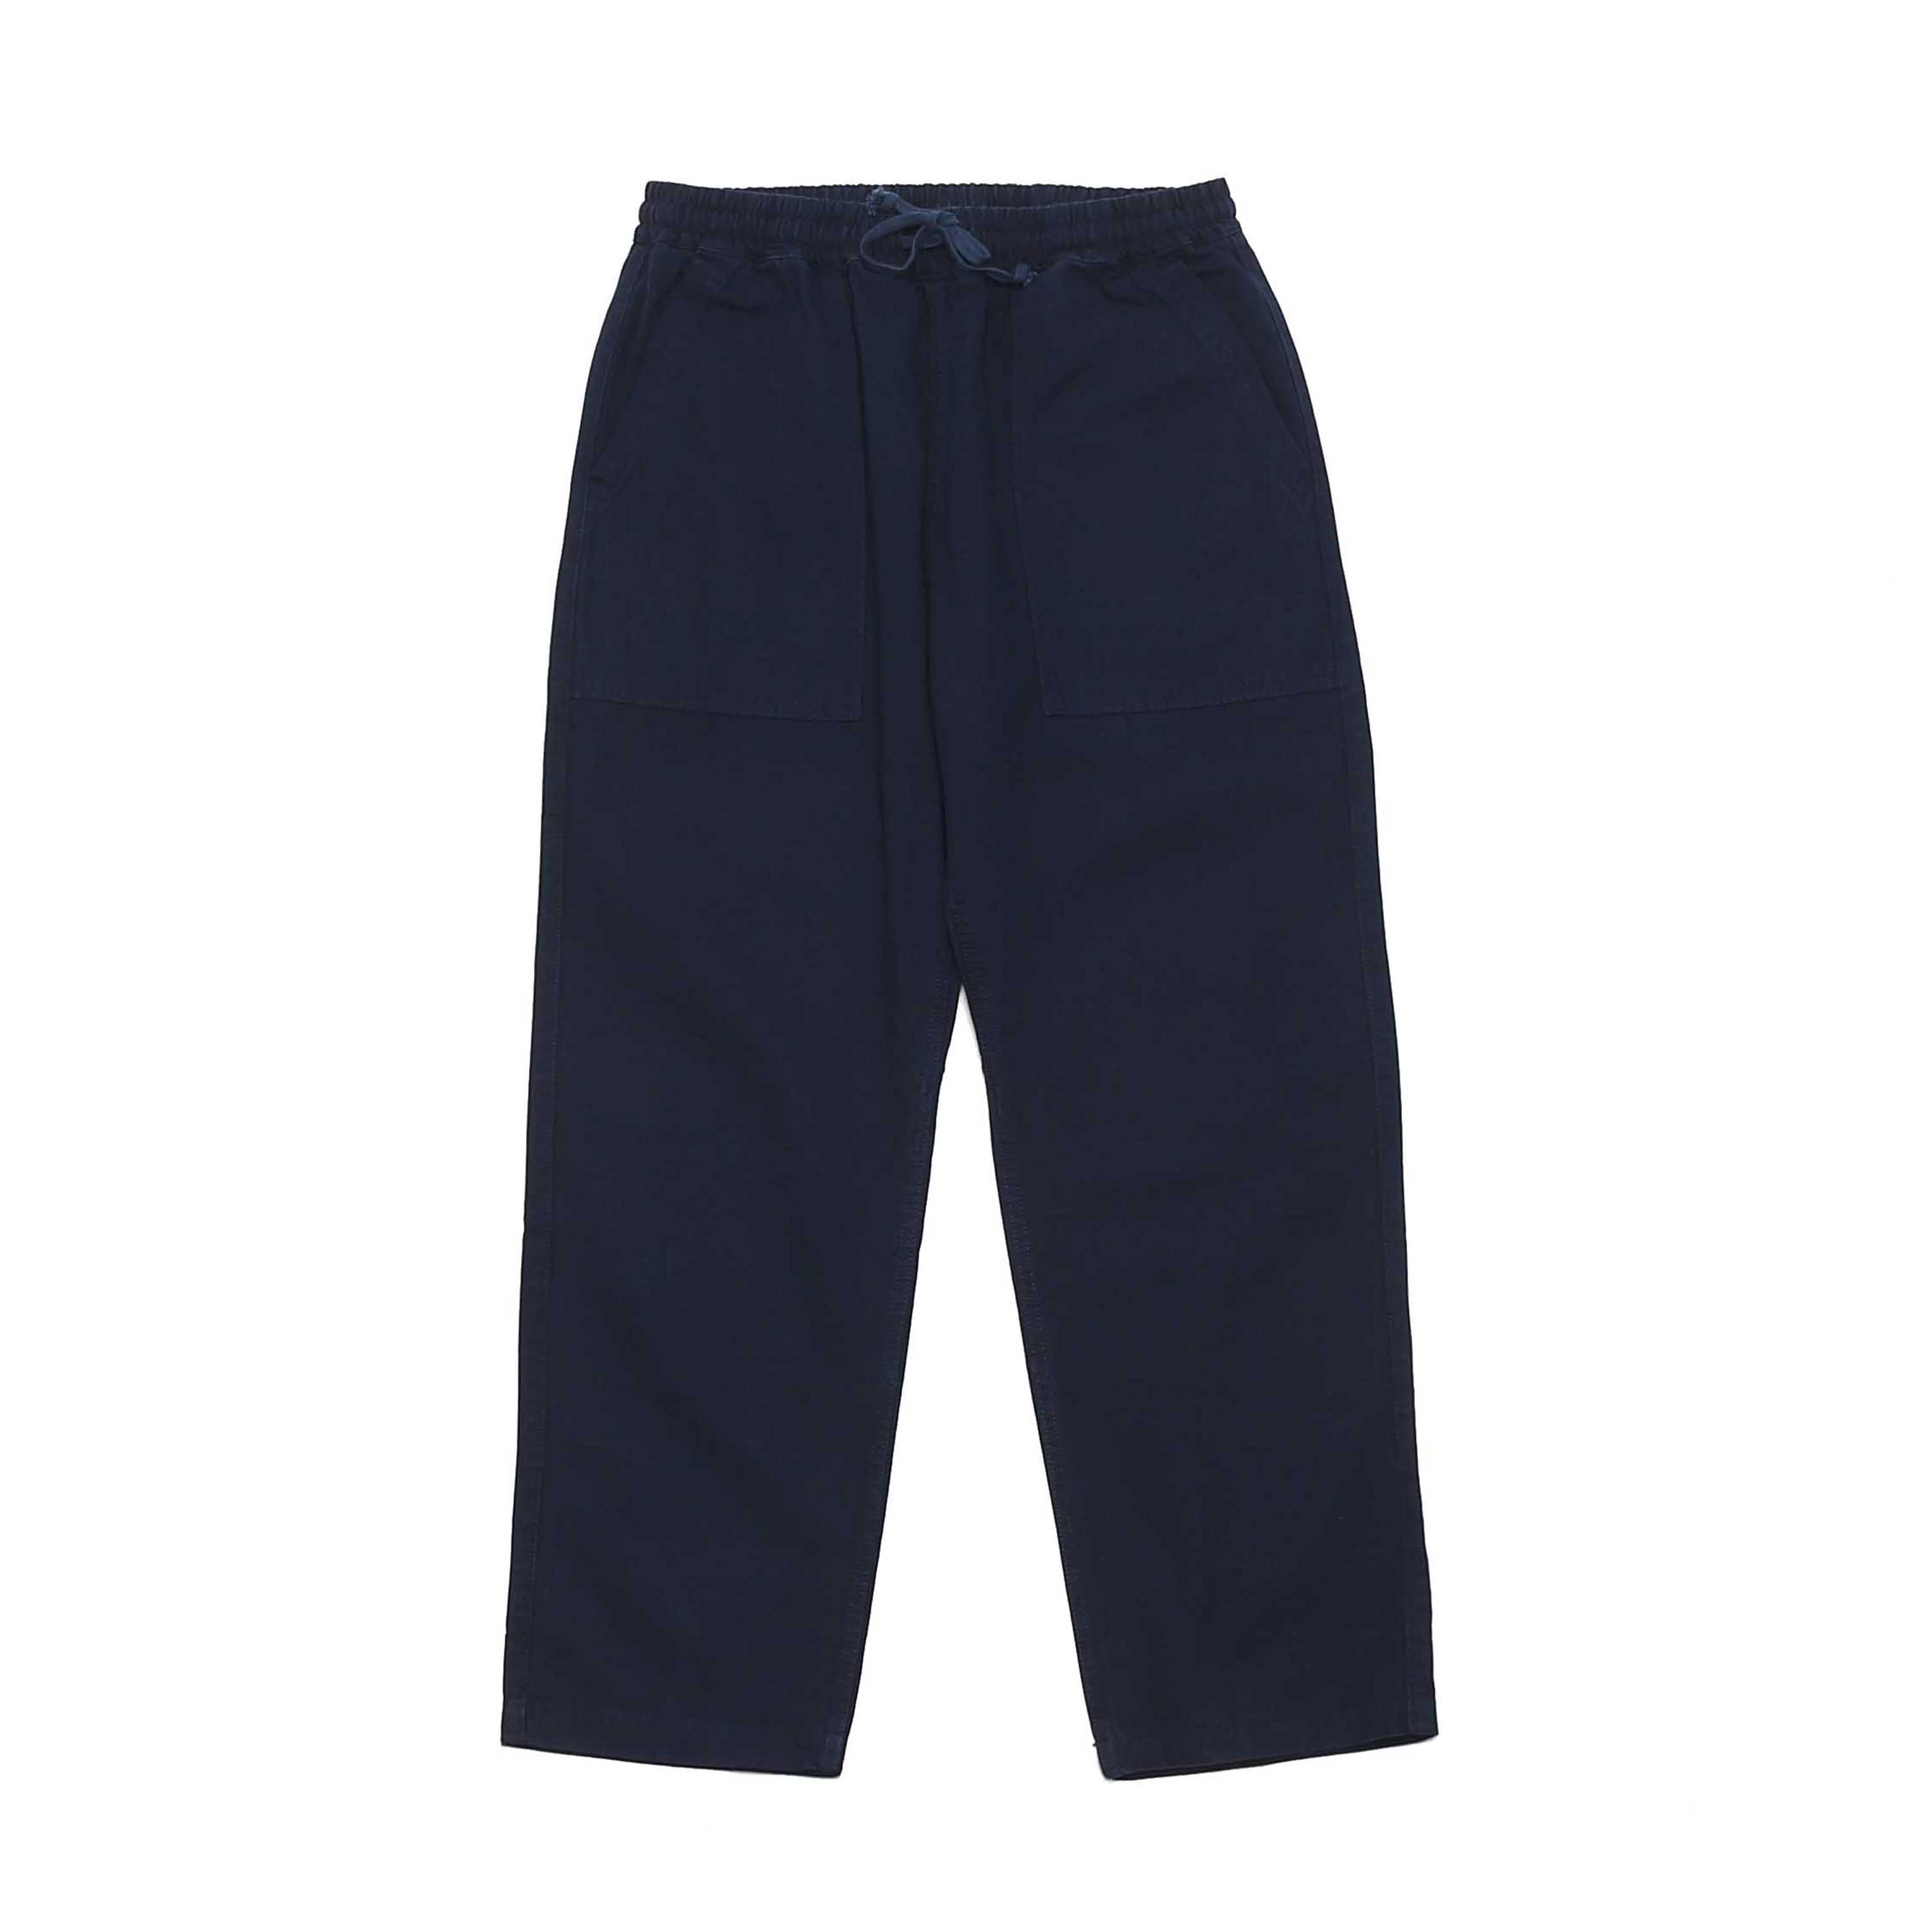 CLASSIC CANVAS CHEF PANTS - NAVY